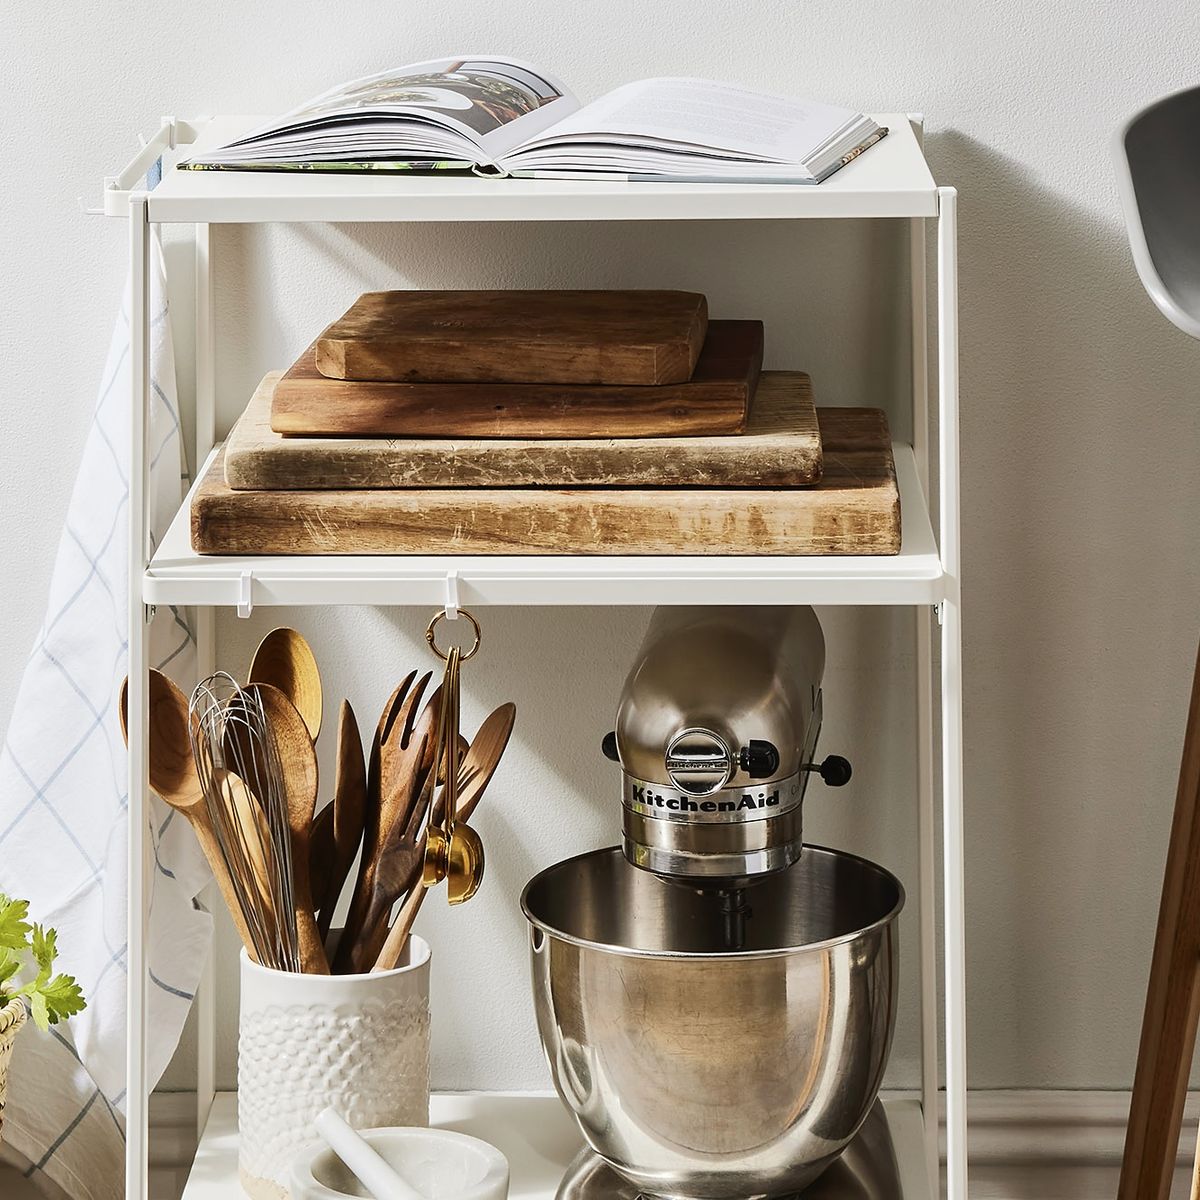 How To Store Everything in the Kitchen